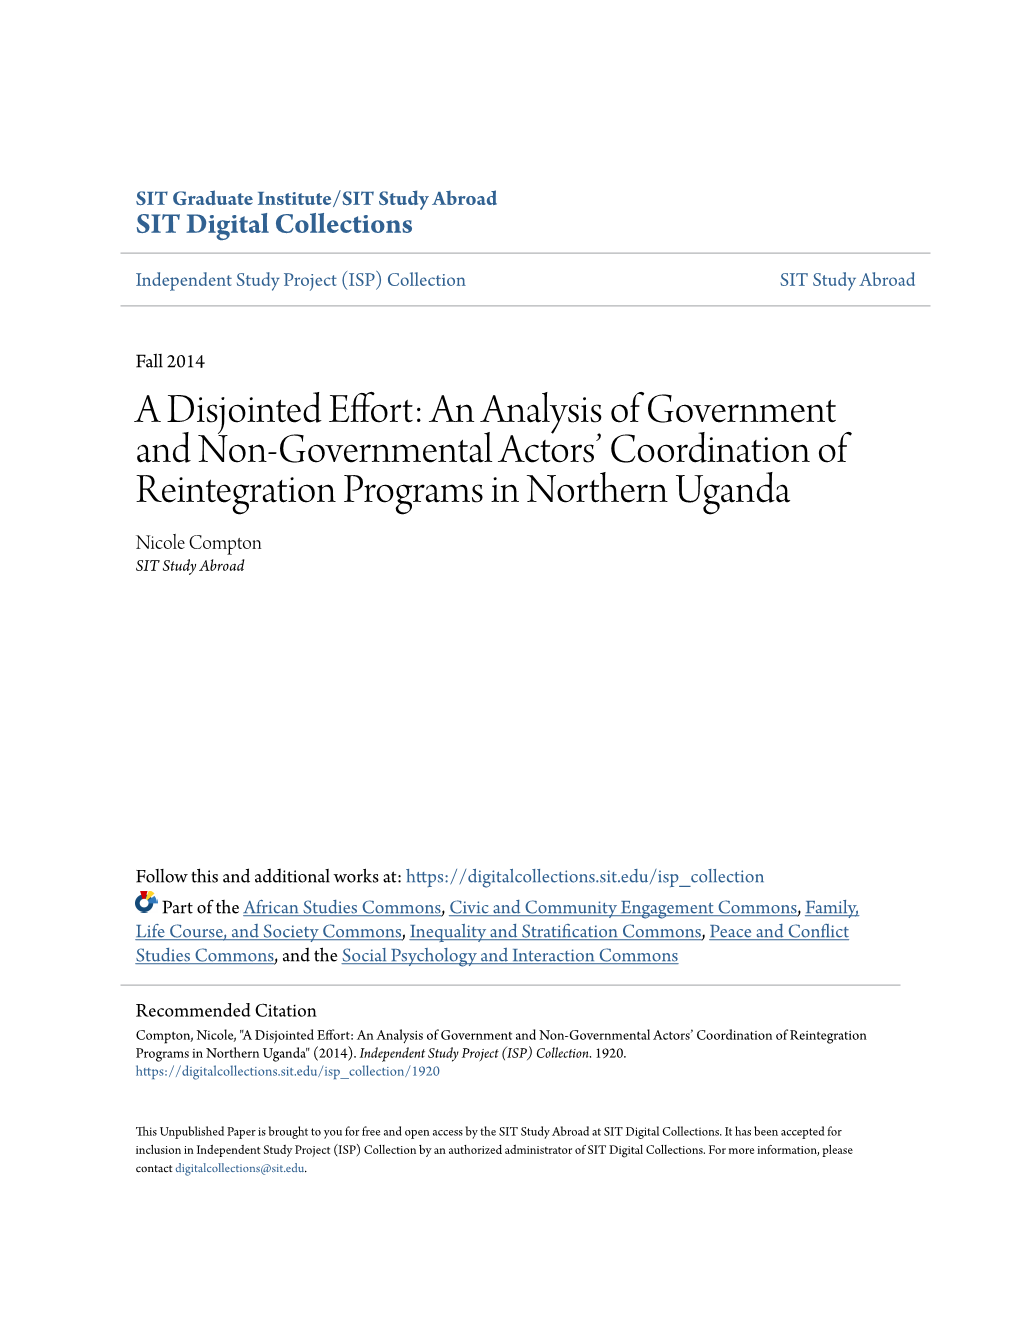 A Disjointed Effort: an Analysis of Government and Non-Governmental Actors’ Coordination of Reintegration Programs in Northern Uganda Nicole Compton SIT Study Abroad